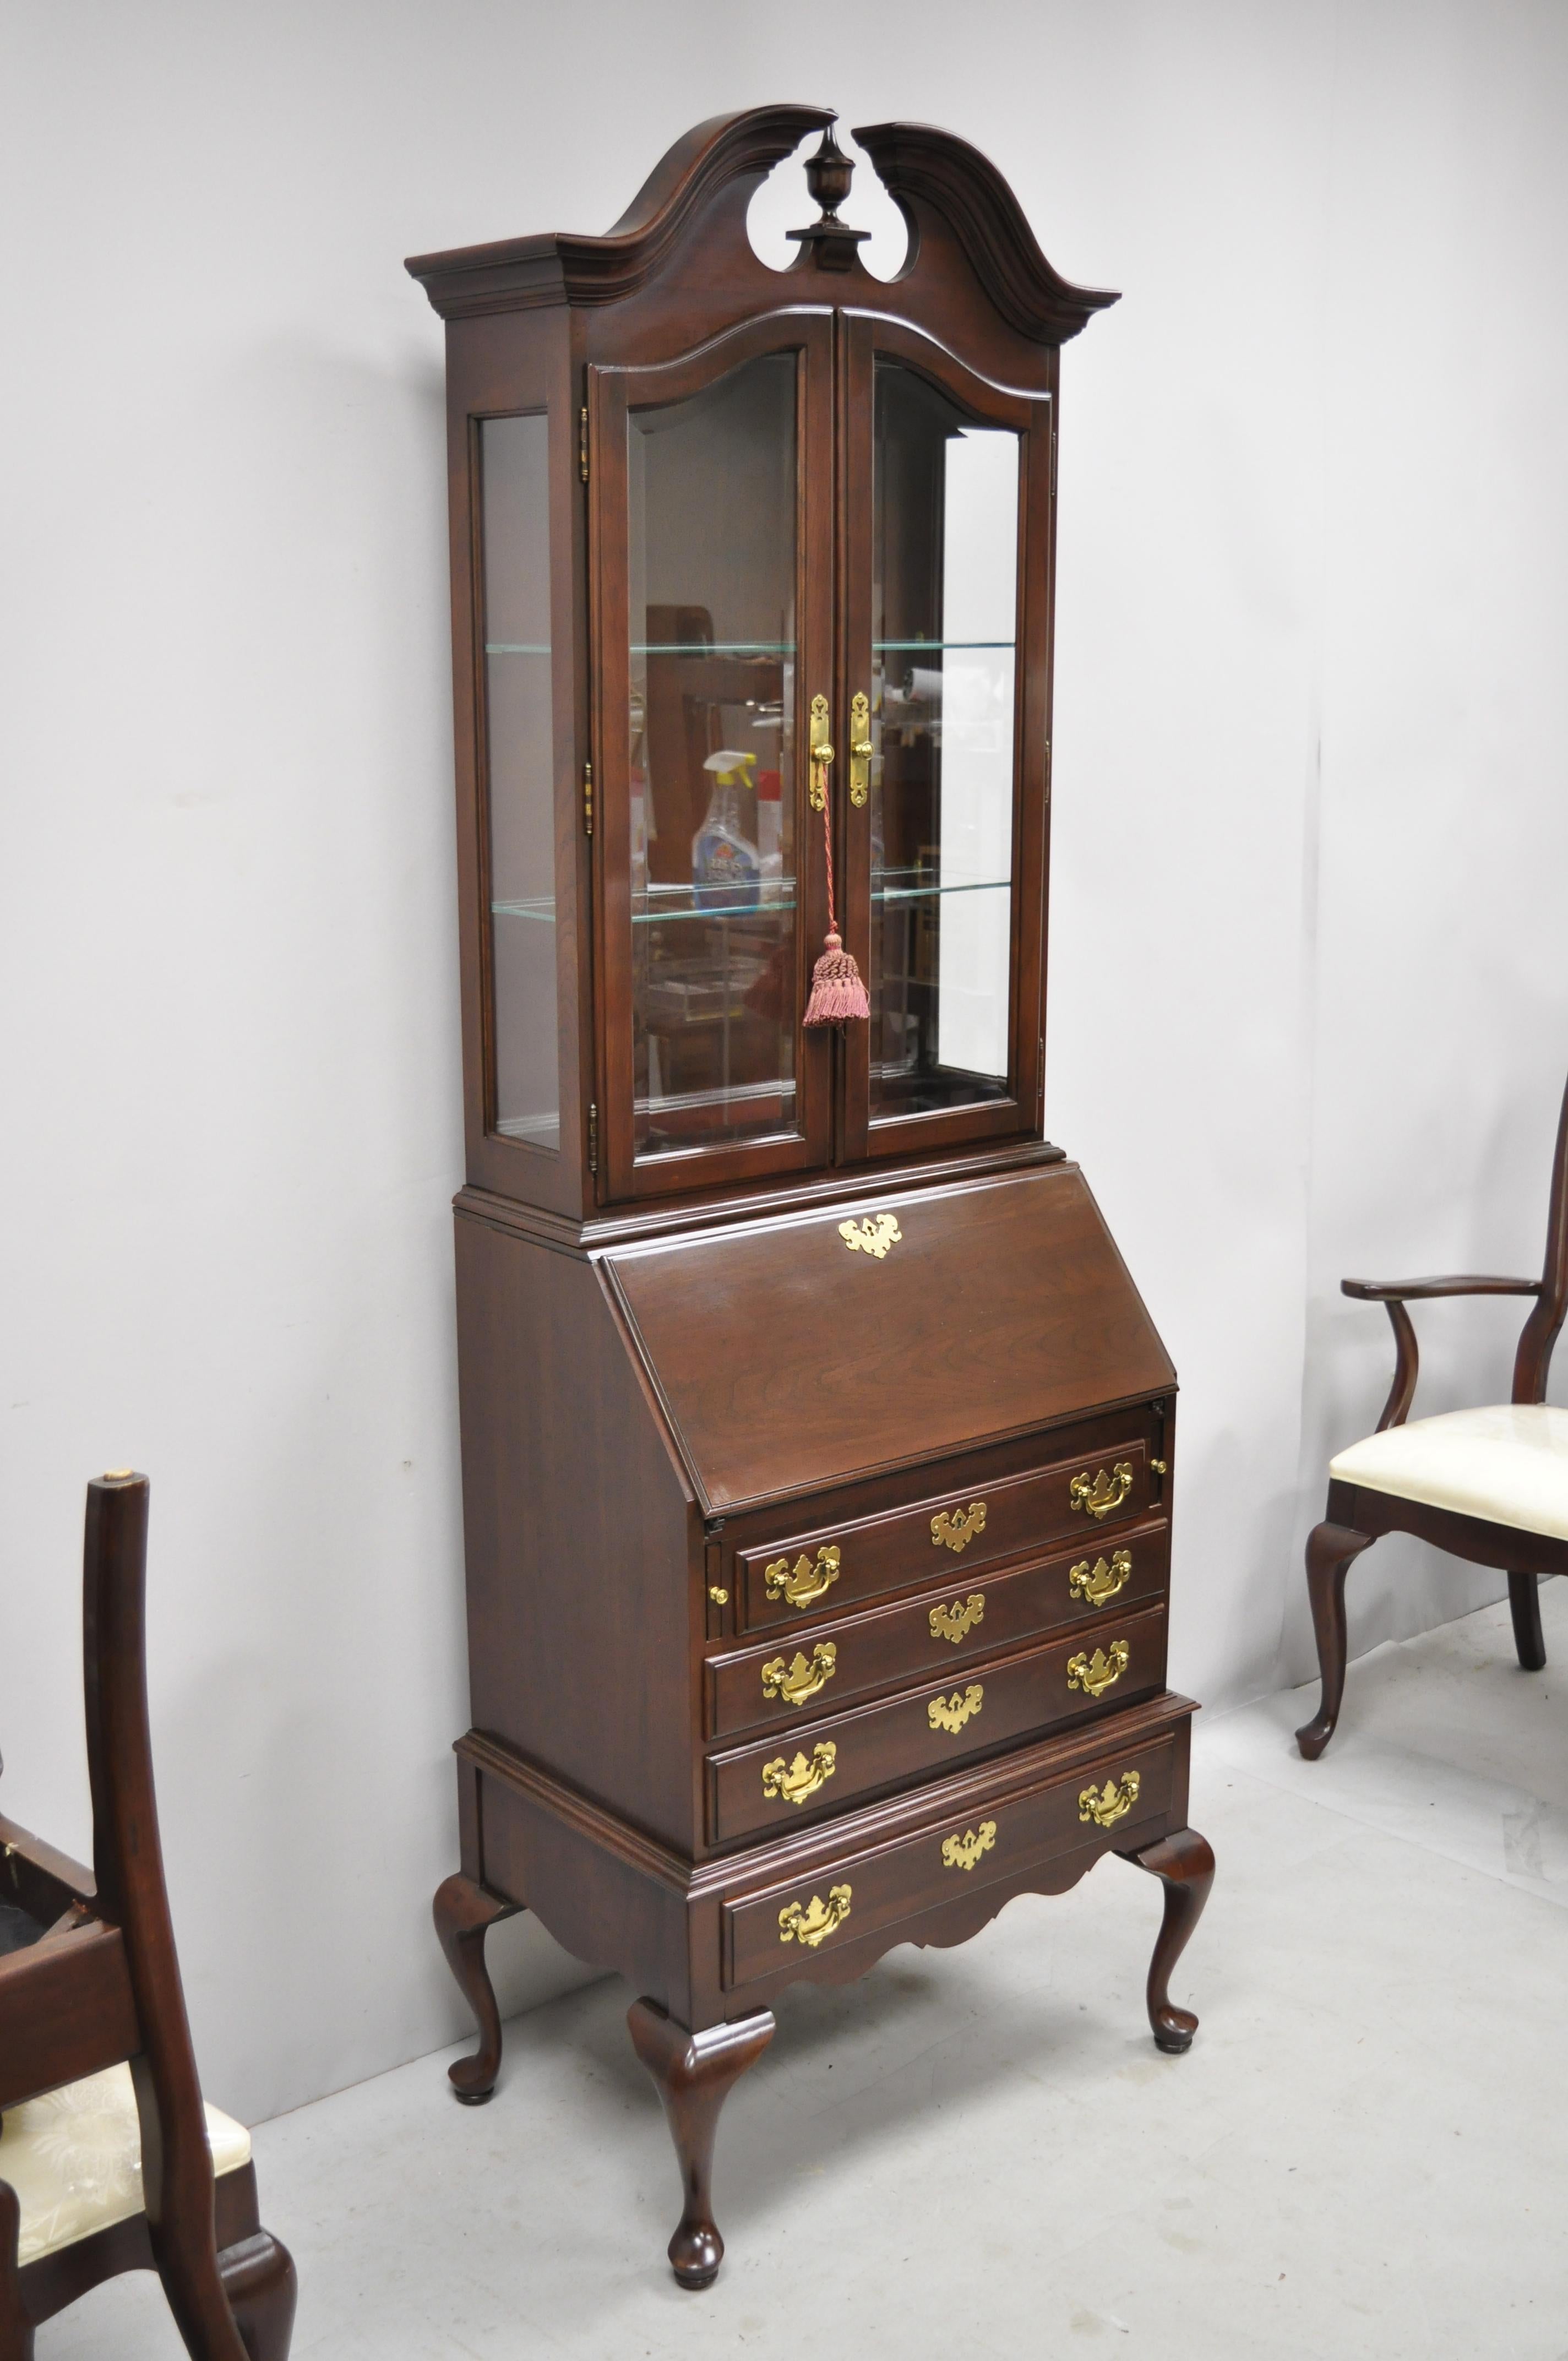 Ethan Allen Georgian court cherrywood Queen Anne fall front secretary desk. Item features a solid wood construction, beautiful wood grain, 2 part construction, lighted interior, 2 glass swing doors, original label, serial number [225 11-9203